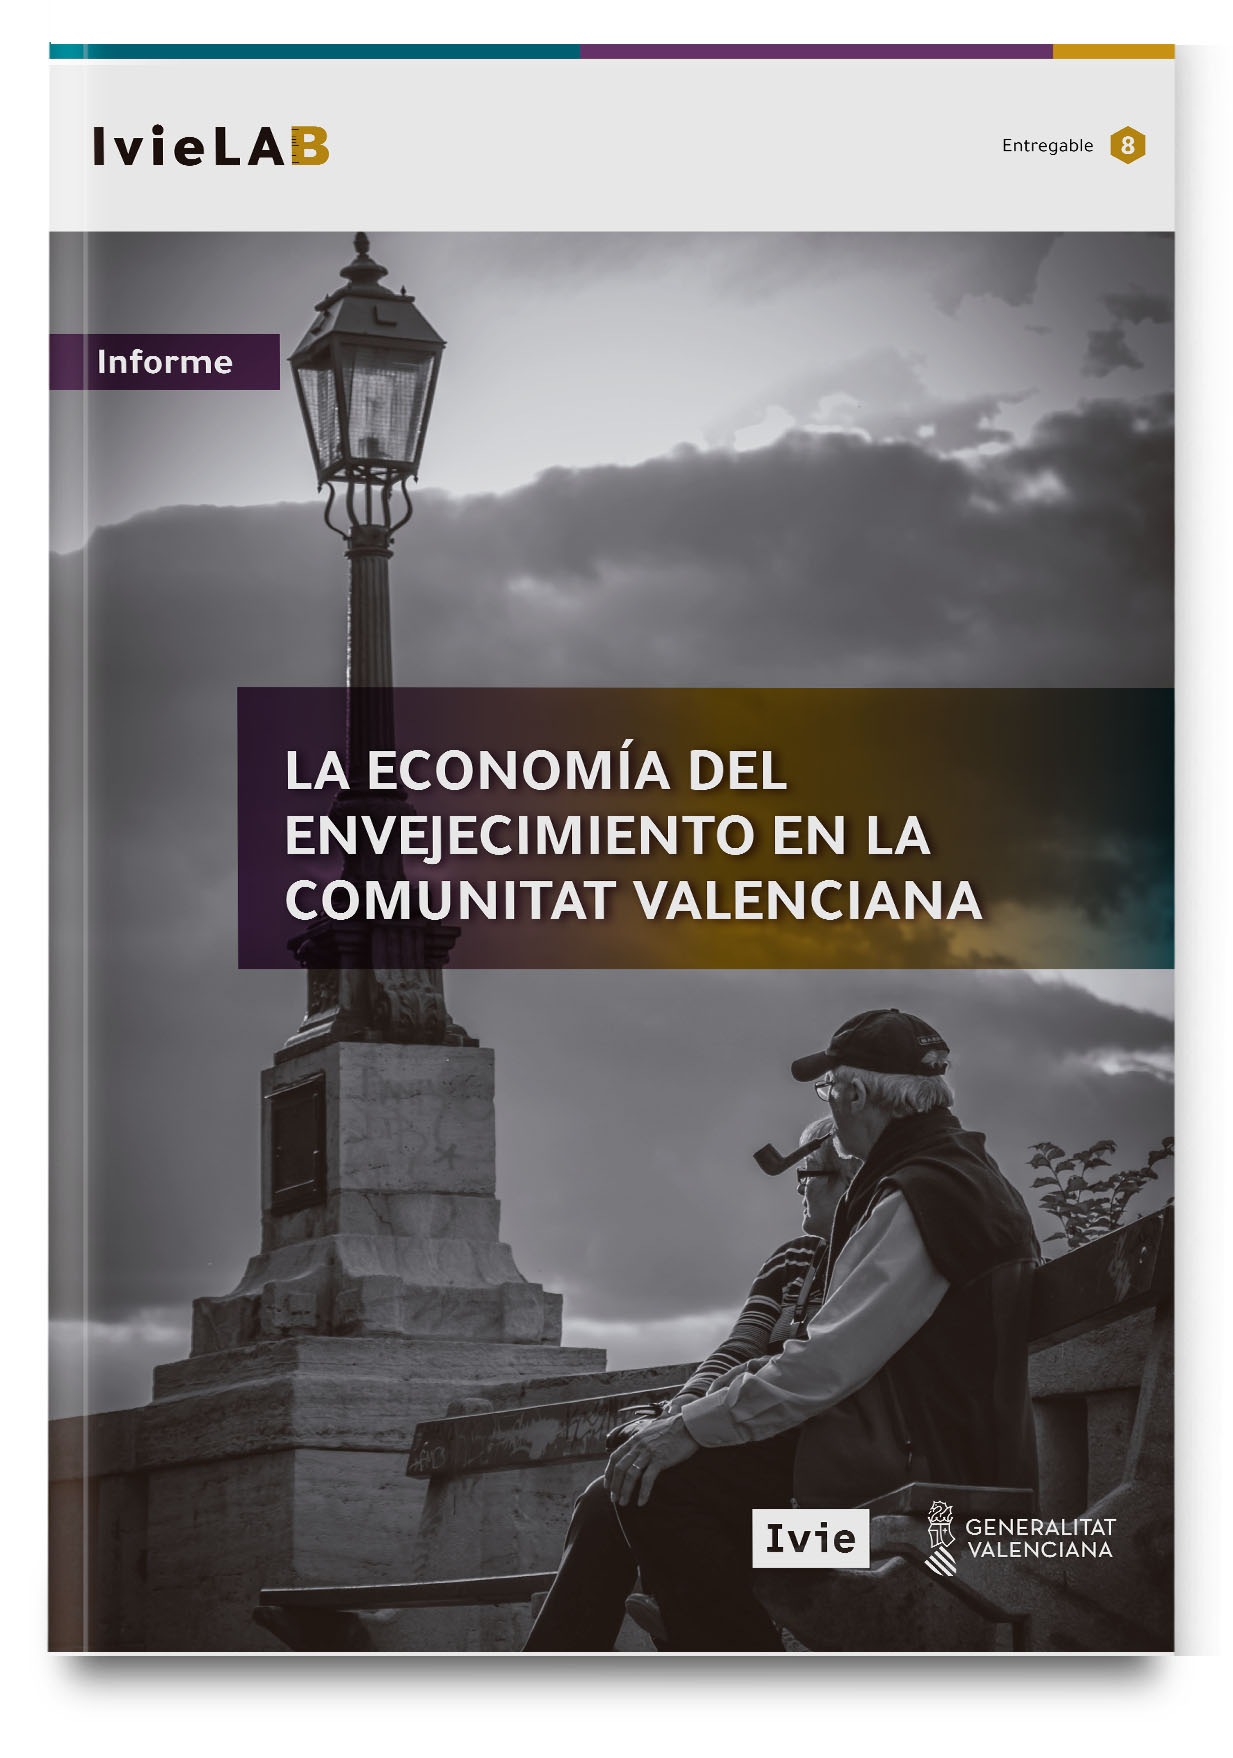 IvieLAB: The economics of ageing in the Valencian Community